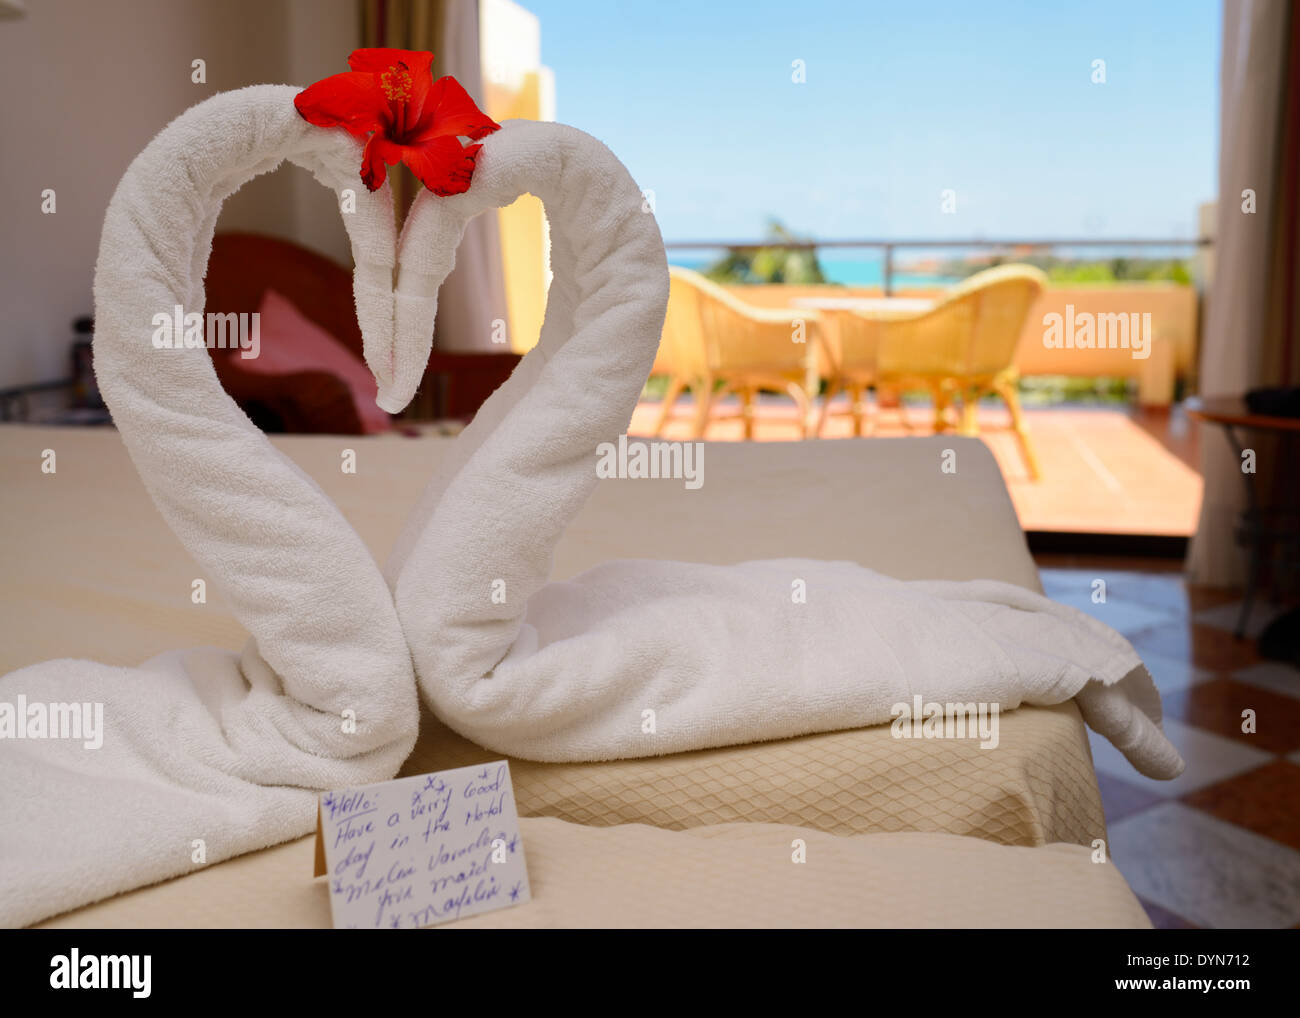 Varadero hotel room made up by maid with two towel swans and note Cuba Stock Photo